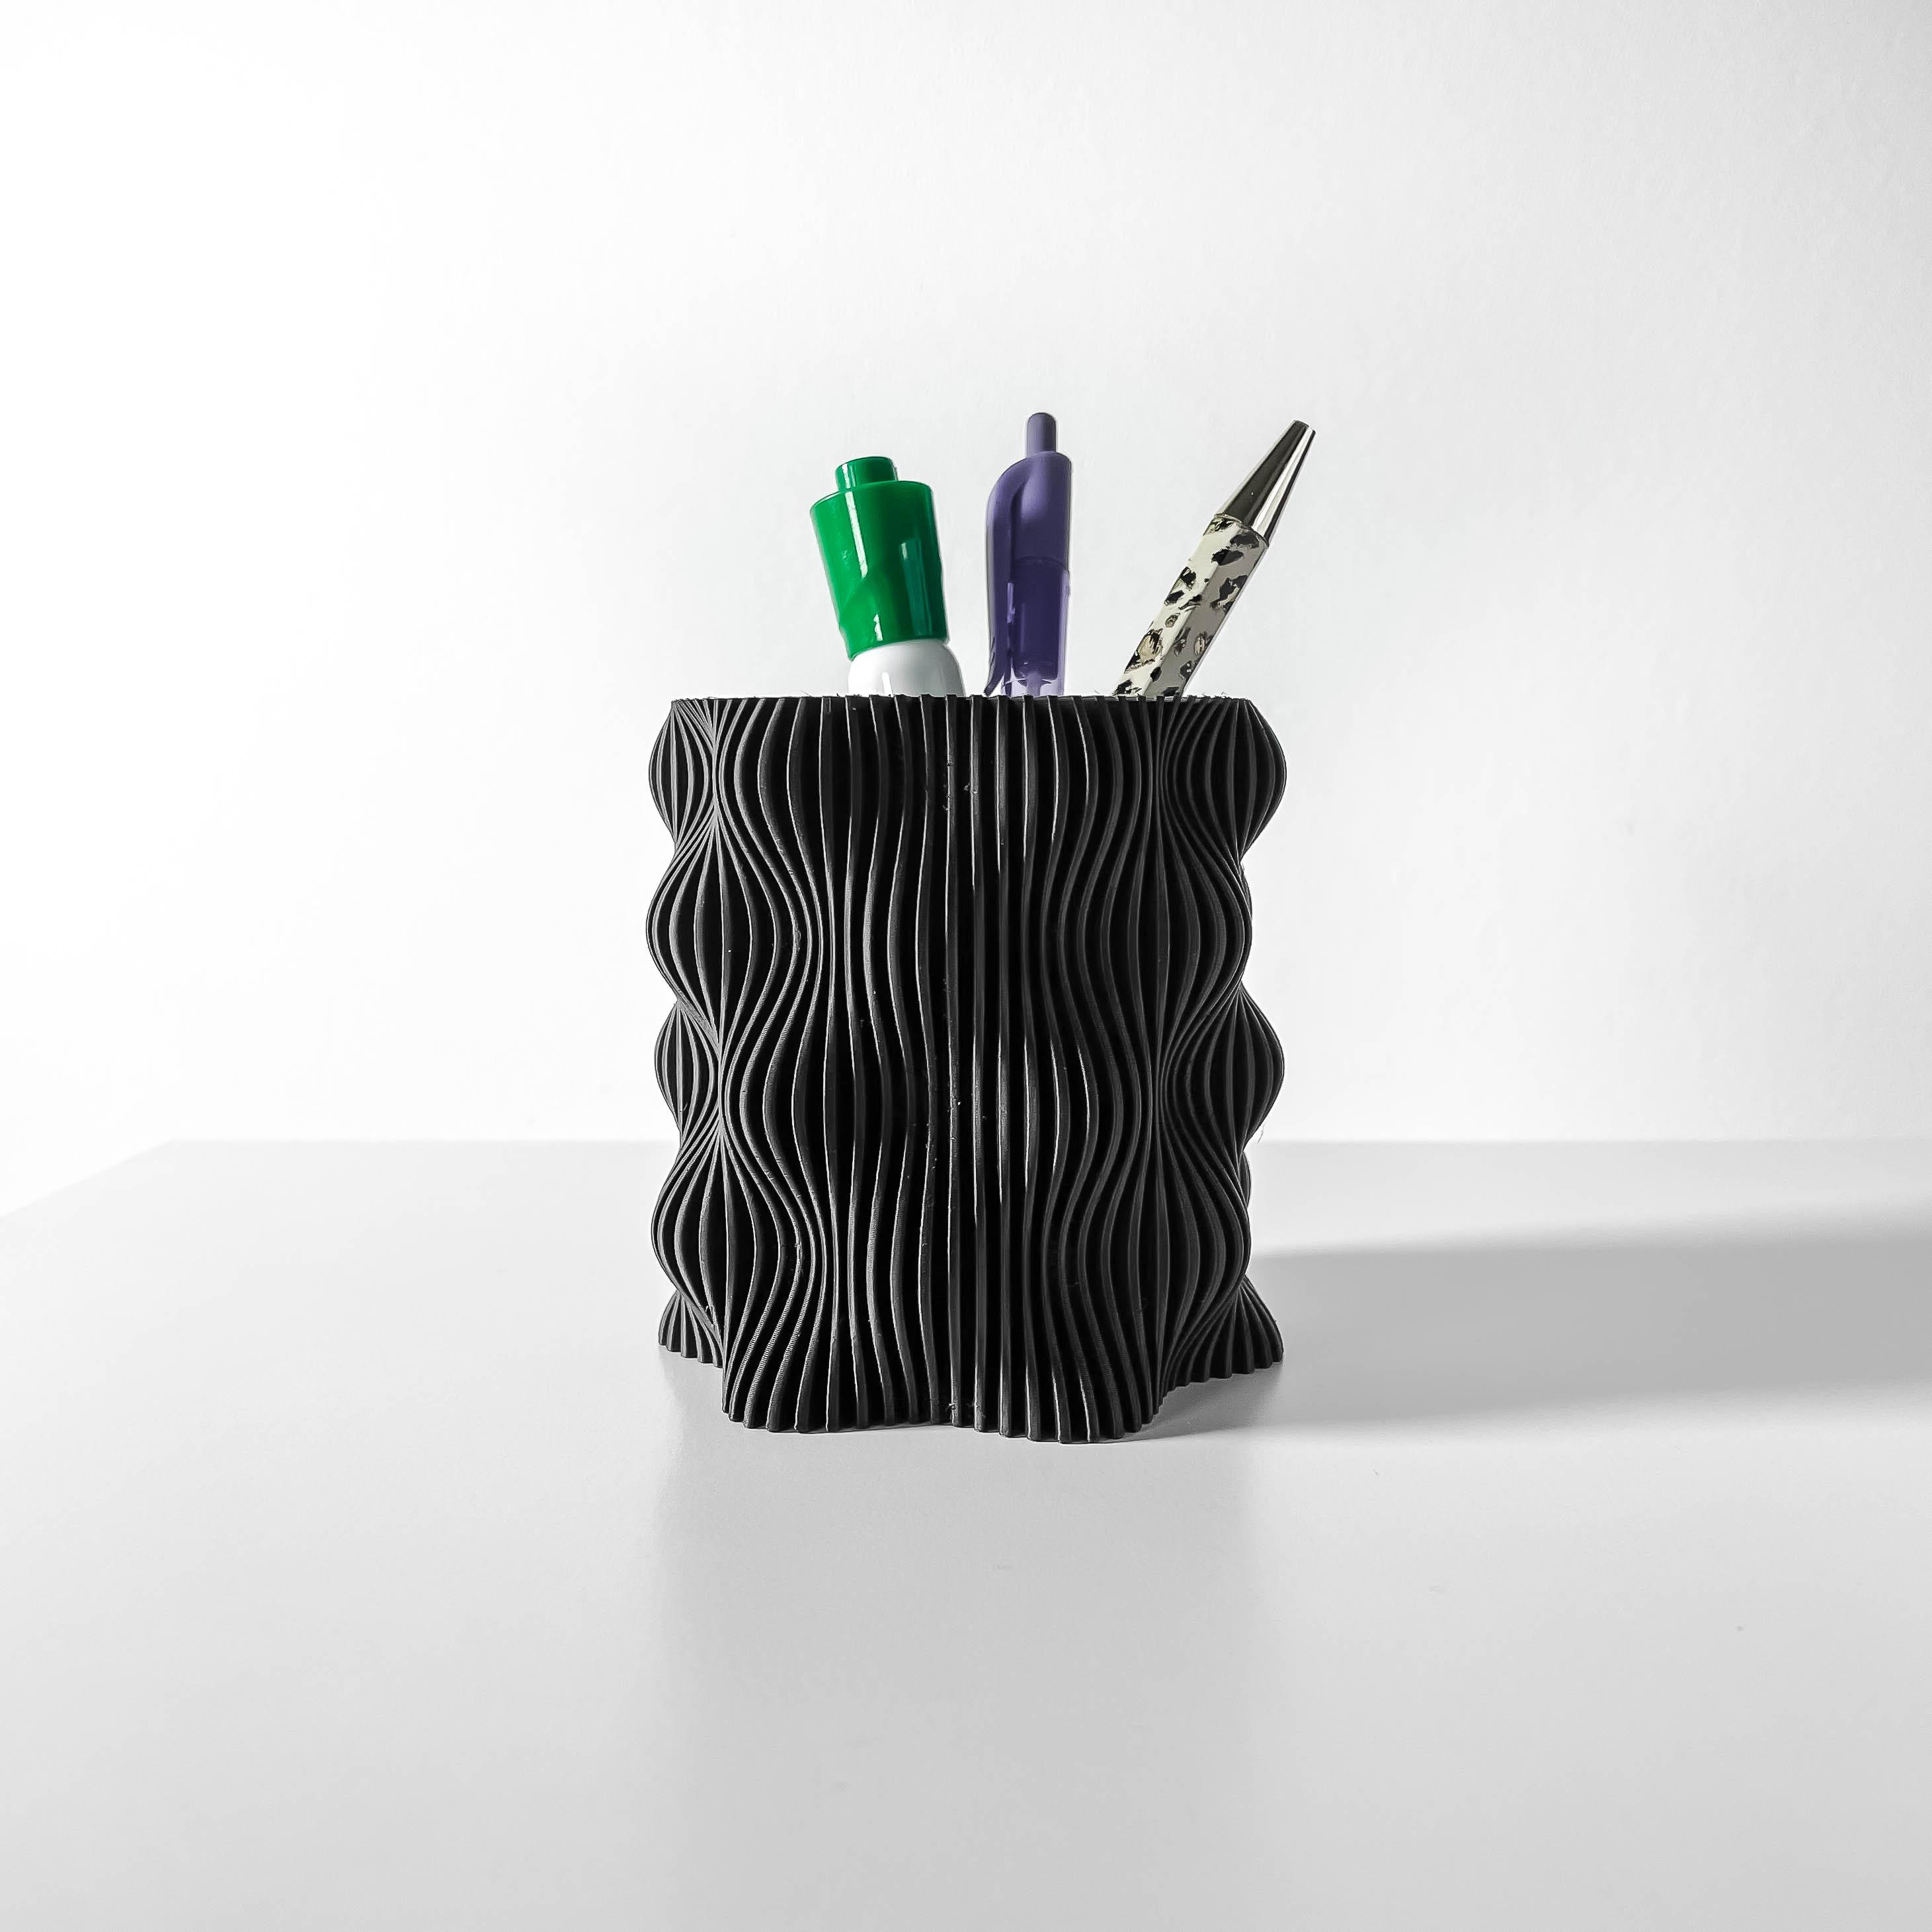 The Muxel Pen Holder | Desk Organizer and Pencil Cup Holder | Modern Office and Home Decor 3d model